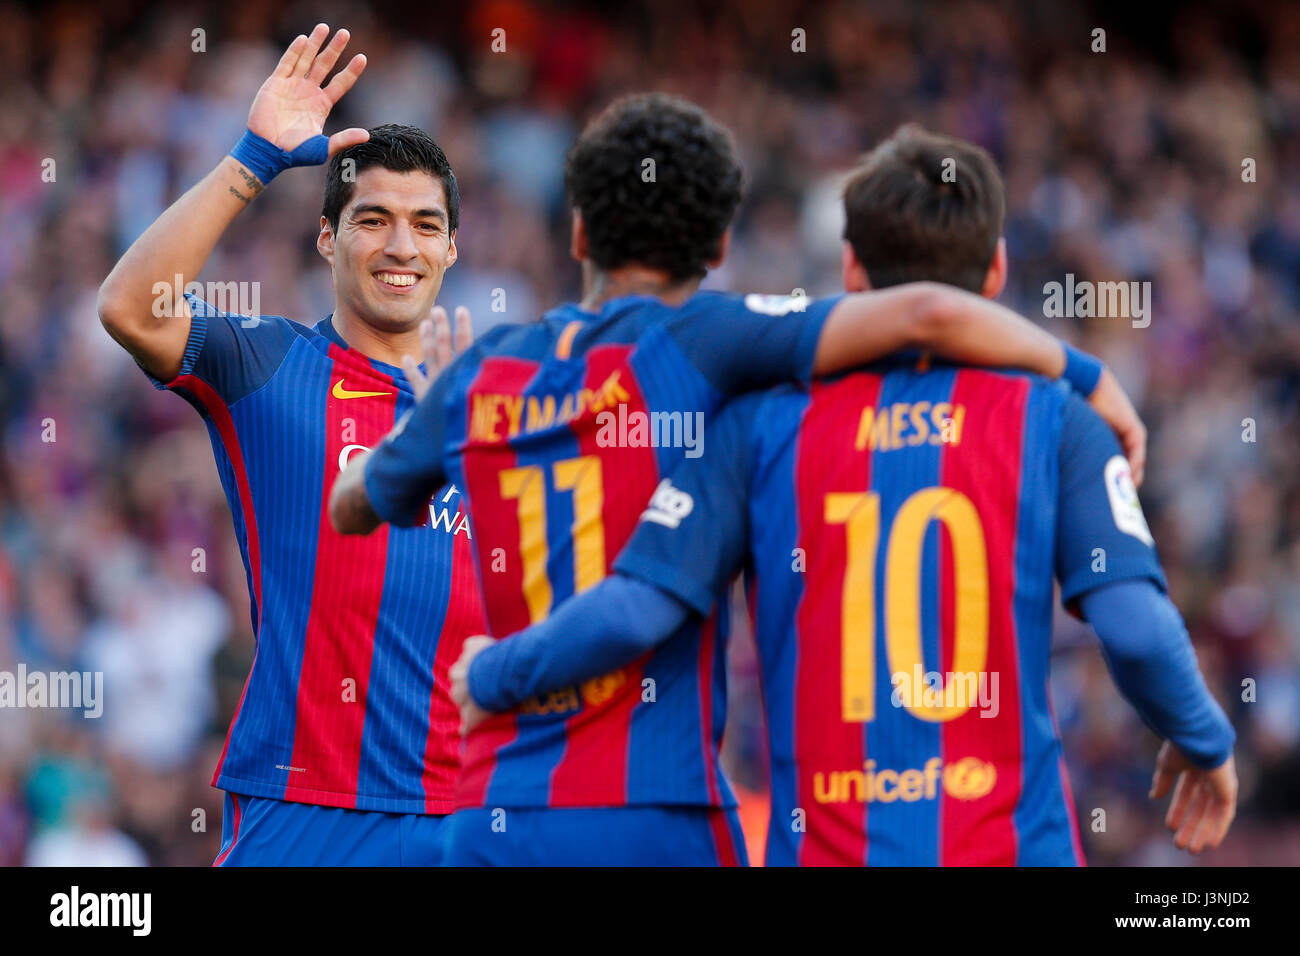 Barcelona, Spain. 6th May, 2017. Barcelona's Neymar(C) celebrates scoring with Luis Suarez(L) and Lionel Messi during the Spanish first division (La Liga)soccer match between FC Barcelona and Villarreal CF at the Camp Nou Stadium in Barcelona, Spain, May 6, 2017. FC Barcelona won 4-1. Credit: Pau Barrena/Xinhua/Alamy Live News Stock Photo